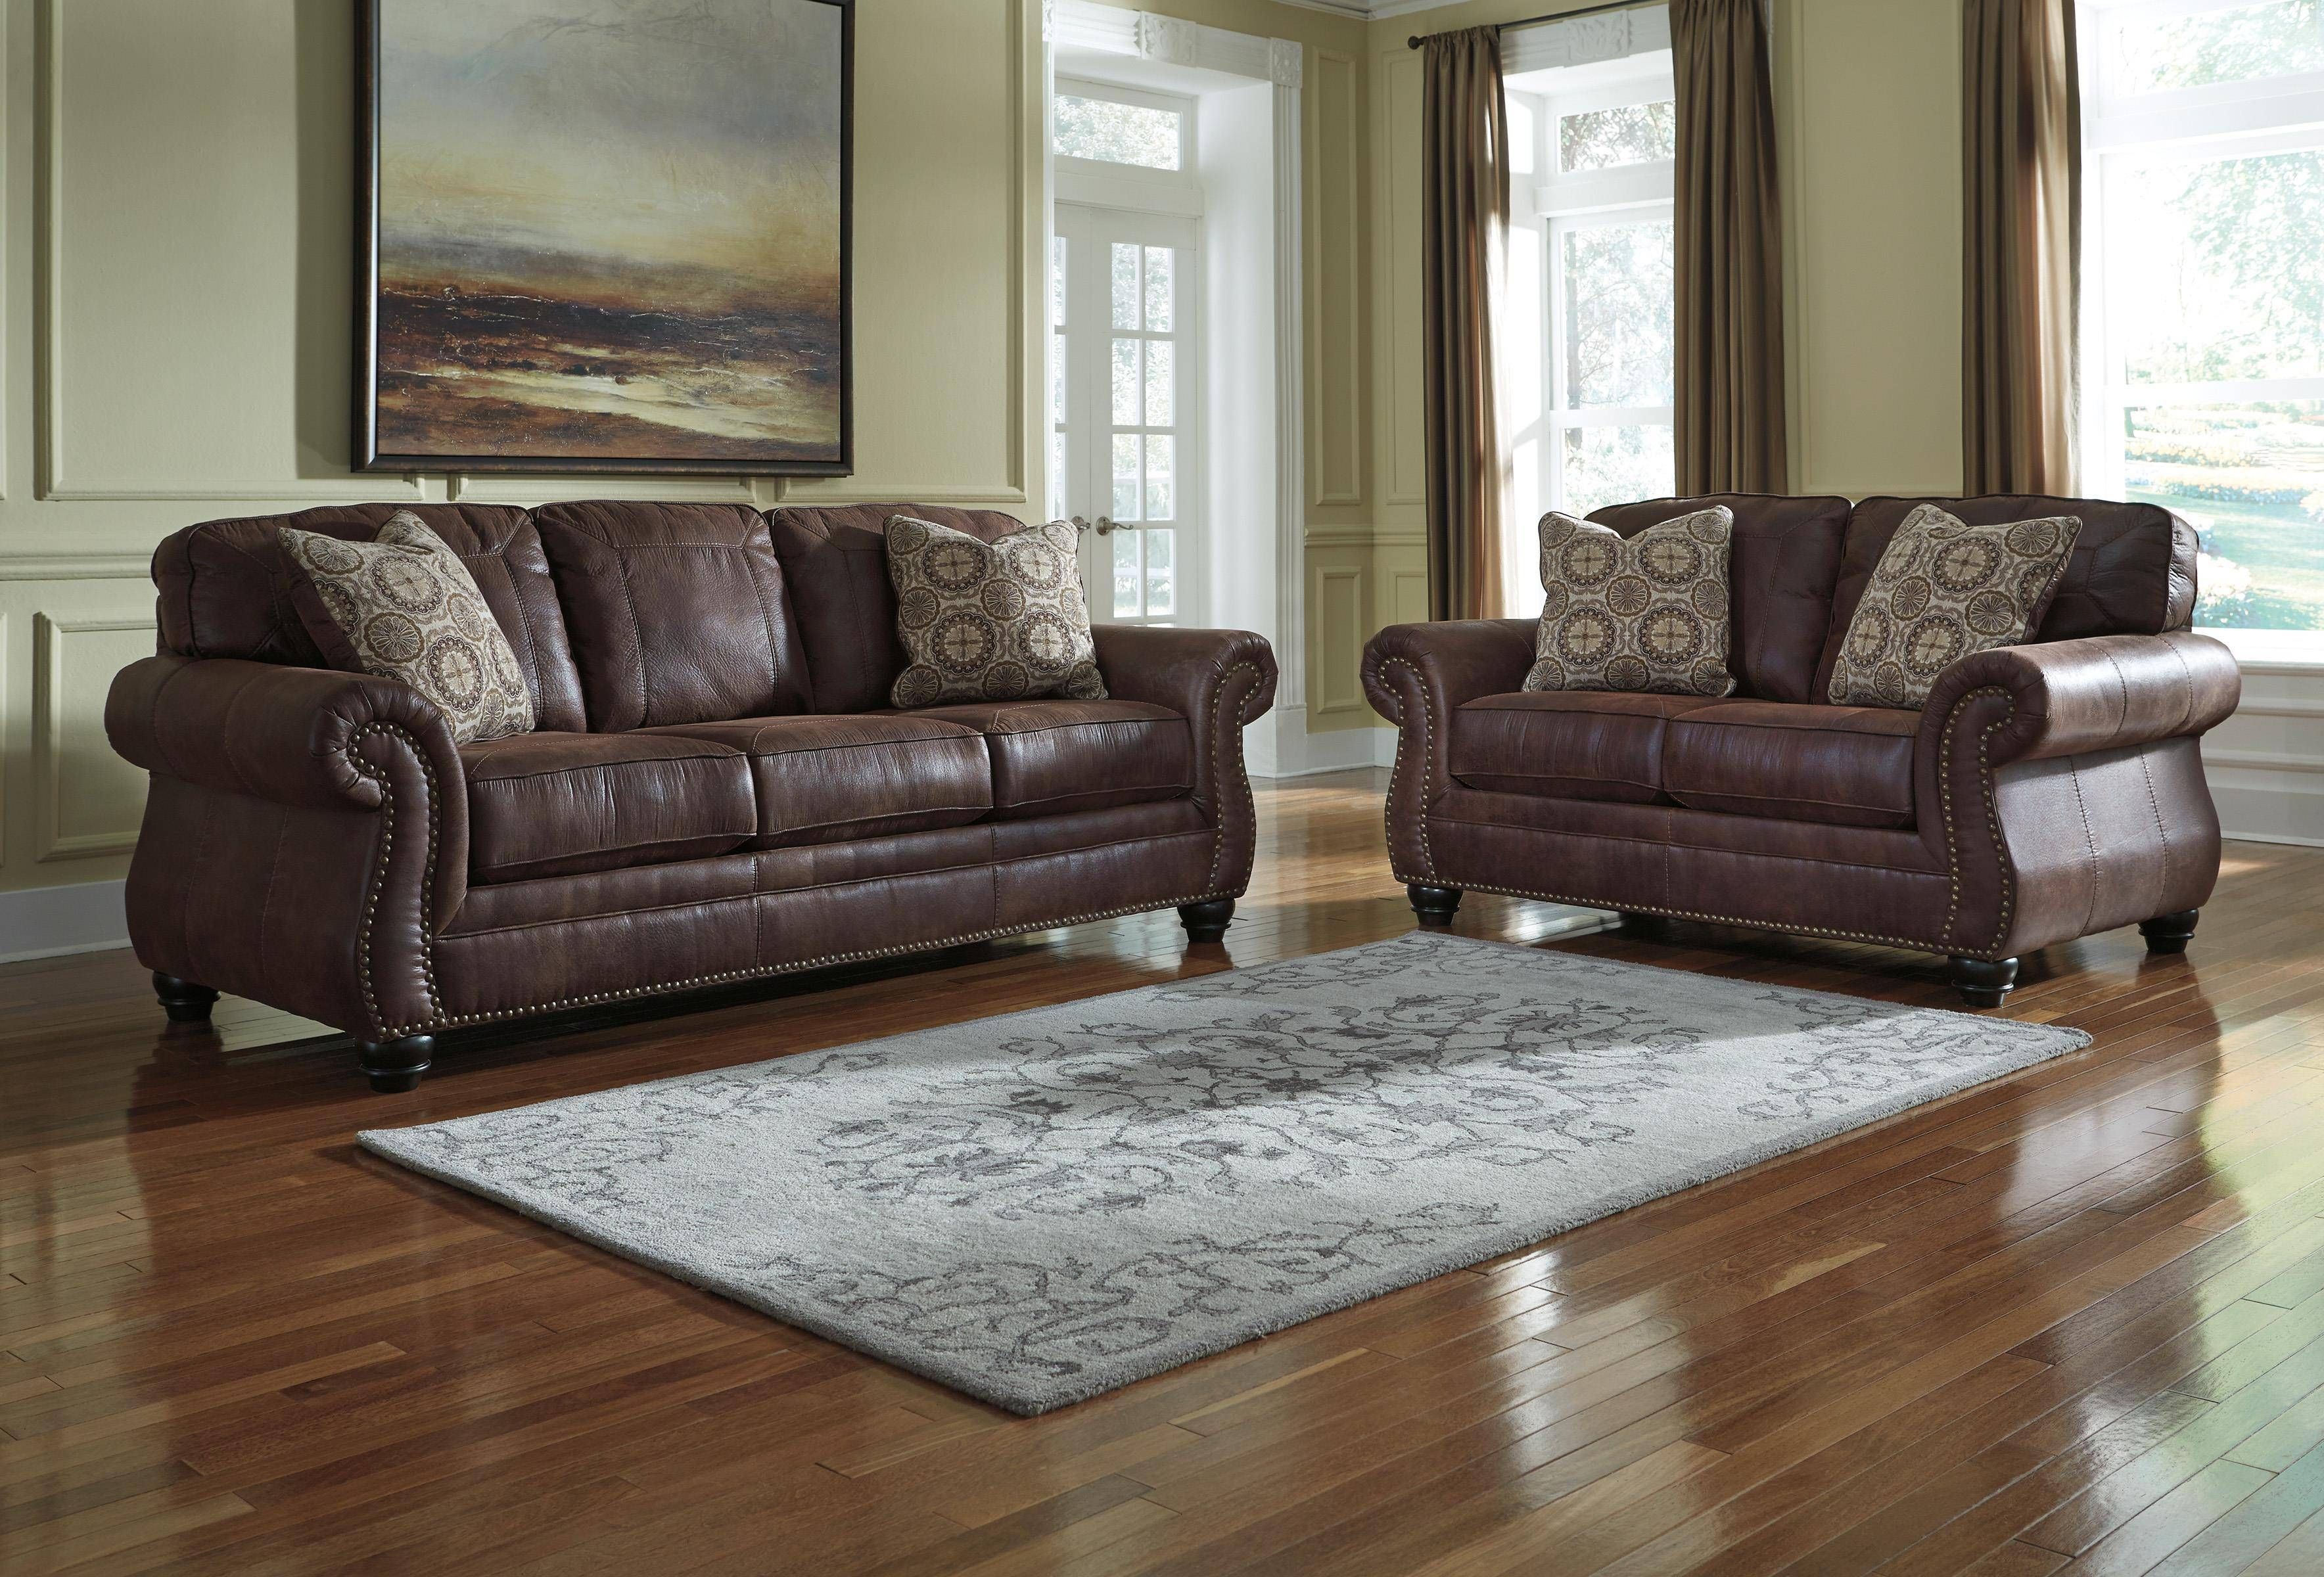 Faux Leather Sofa With Rolled Arms And Nailhead Trimbenchcraft Throughout Benchcraft Leather Sofas (View 4 of 15)